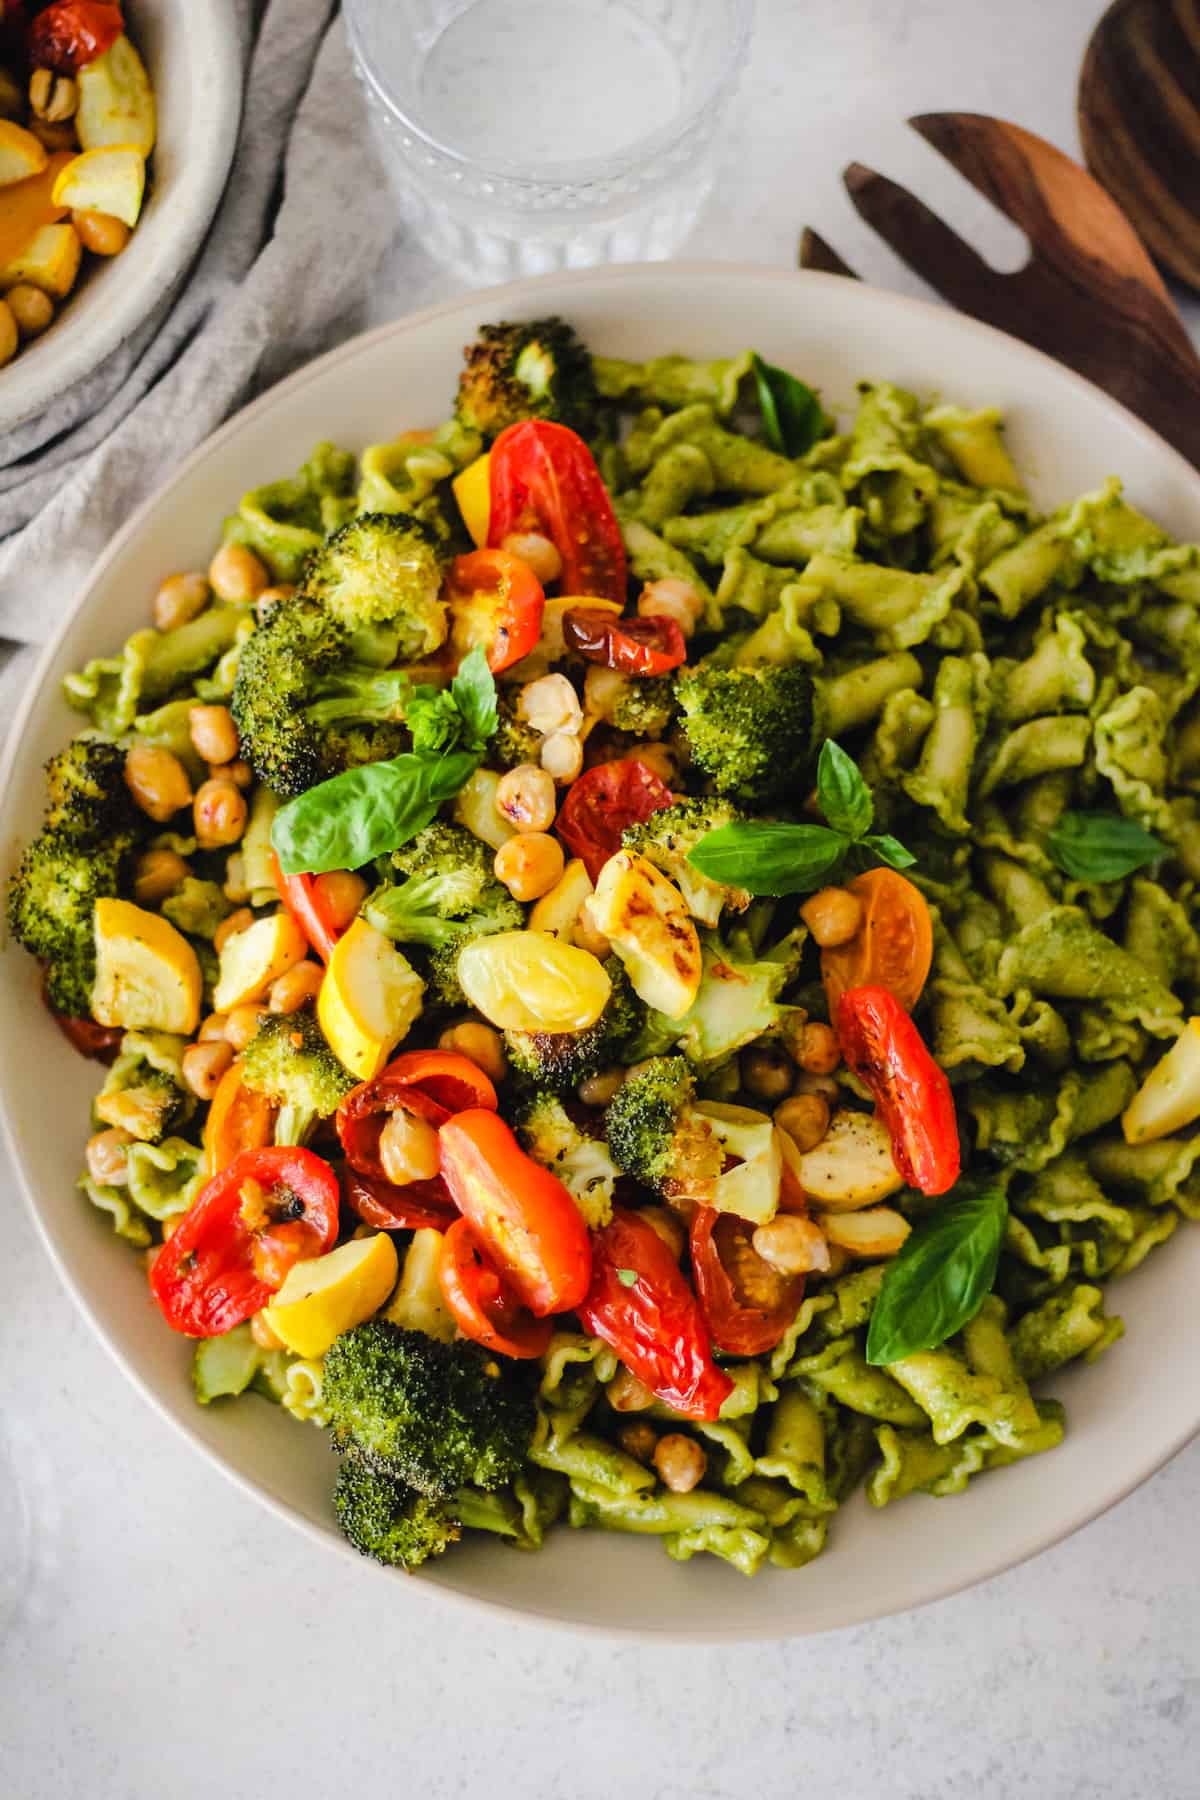 Pesto pasta topped with chickpeas and vegetables.